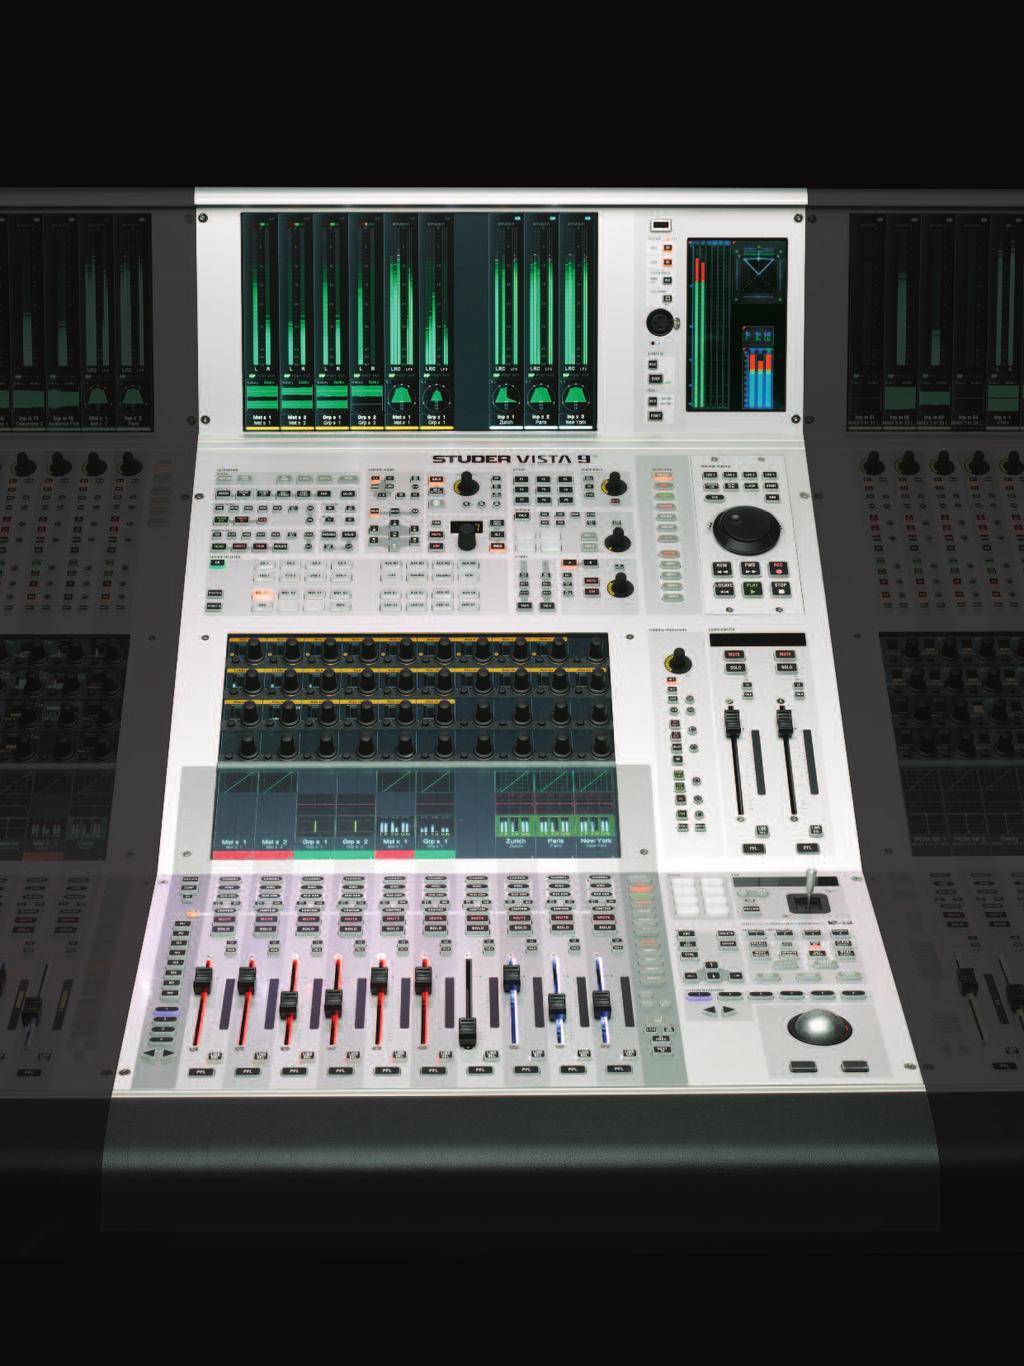 Live Transmission Totally under control The ease of operation in the Fader Bays is replicated in the centralized functions of the Vista 9 Control Bay.